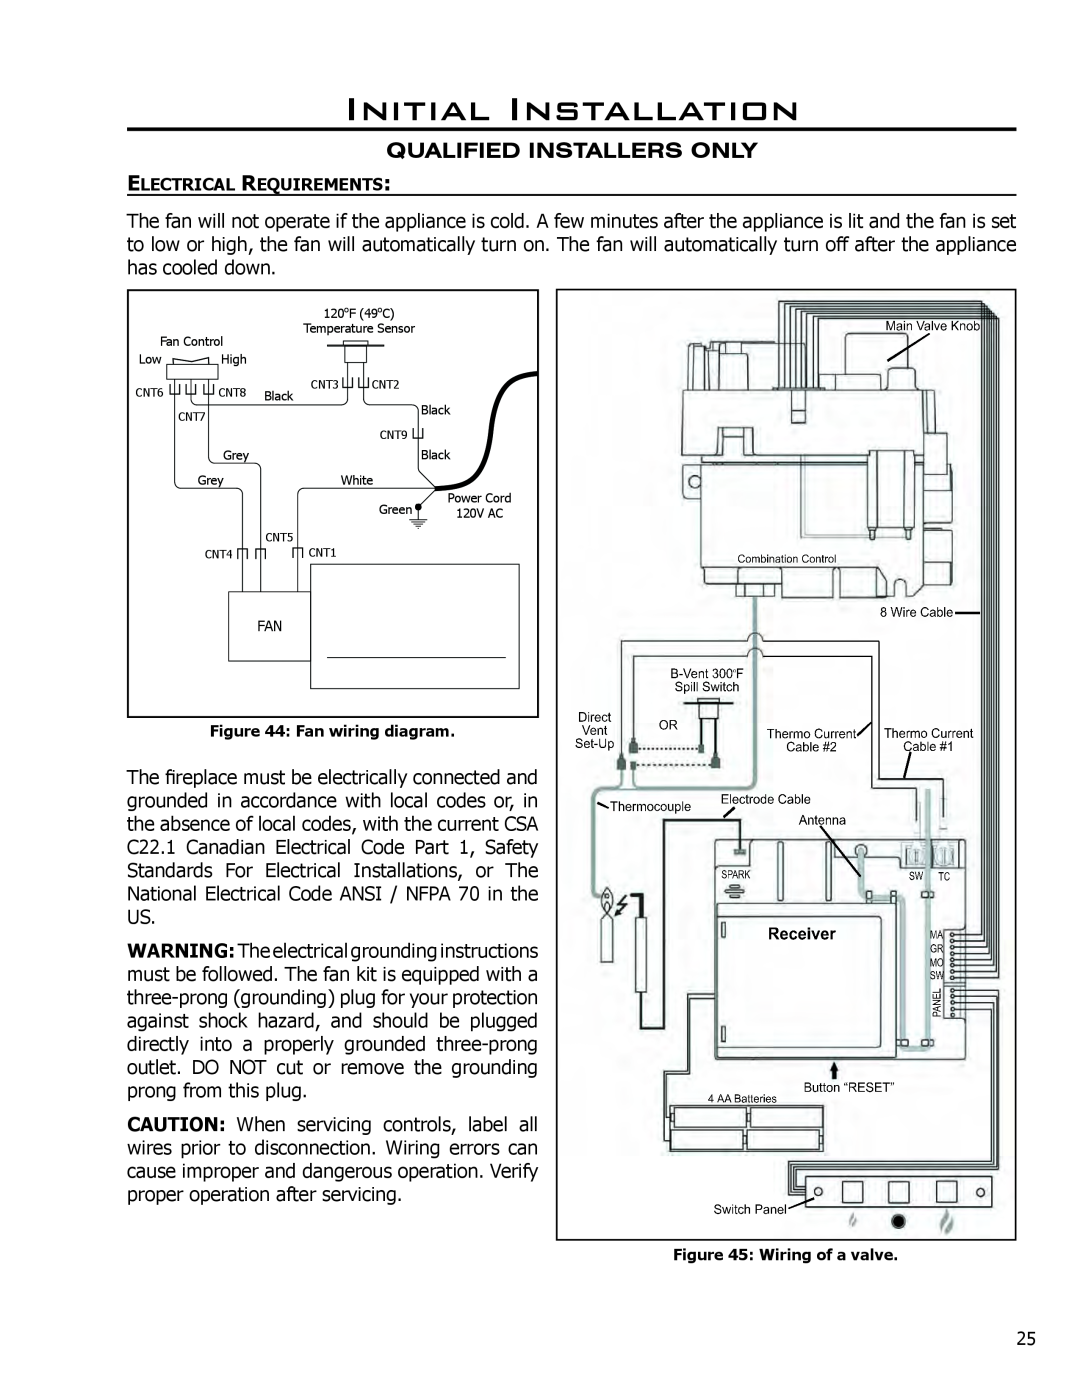 Enviro C-11102, C-11253 Initial Installation, Qualified Installers Only, Electrical Requirements, Fan wiring diagram 